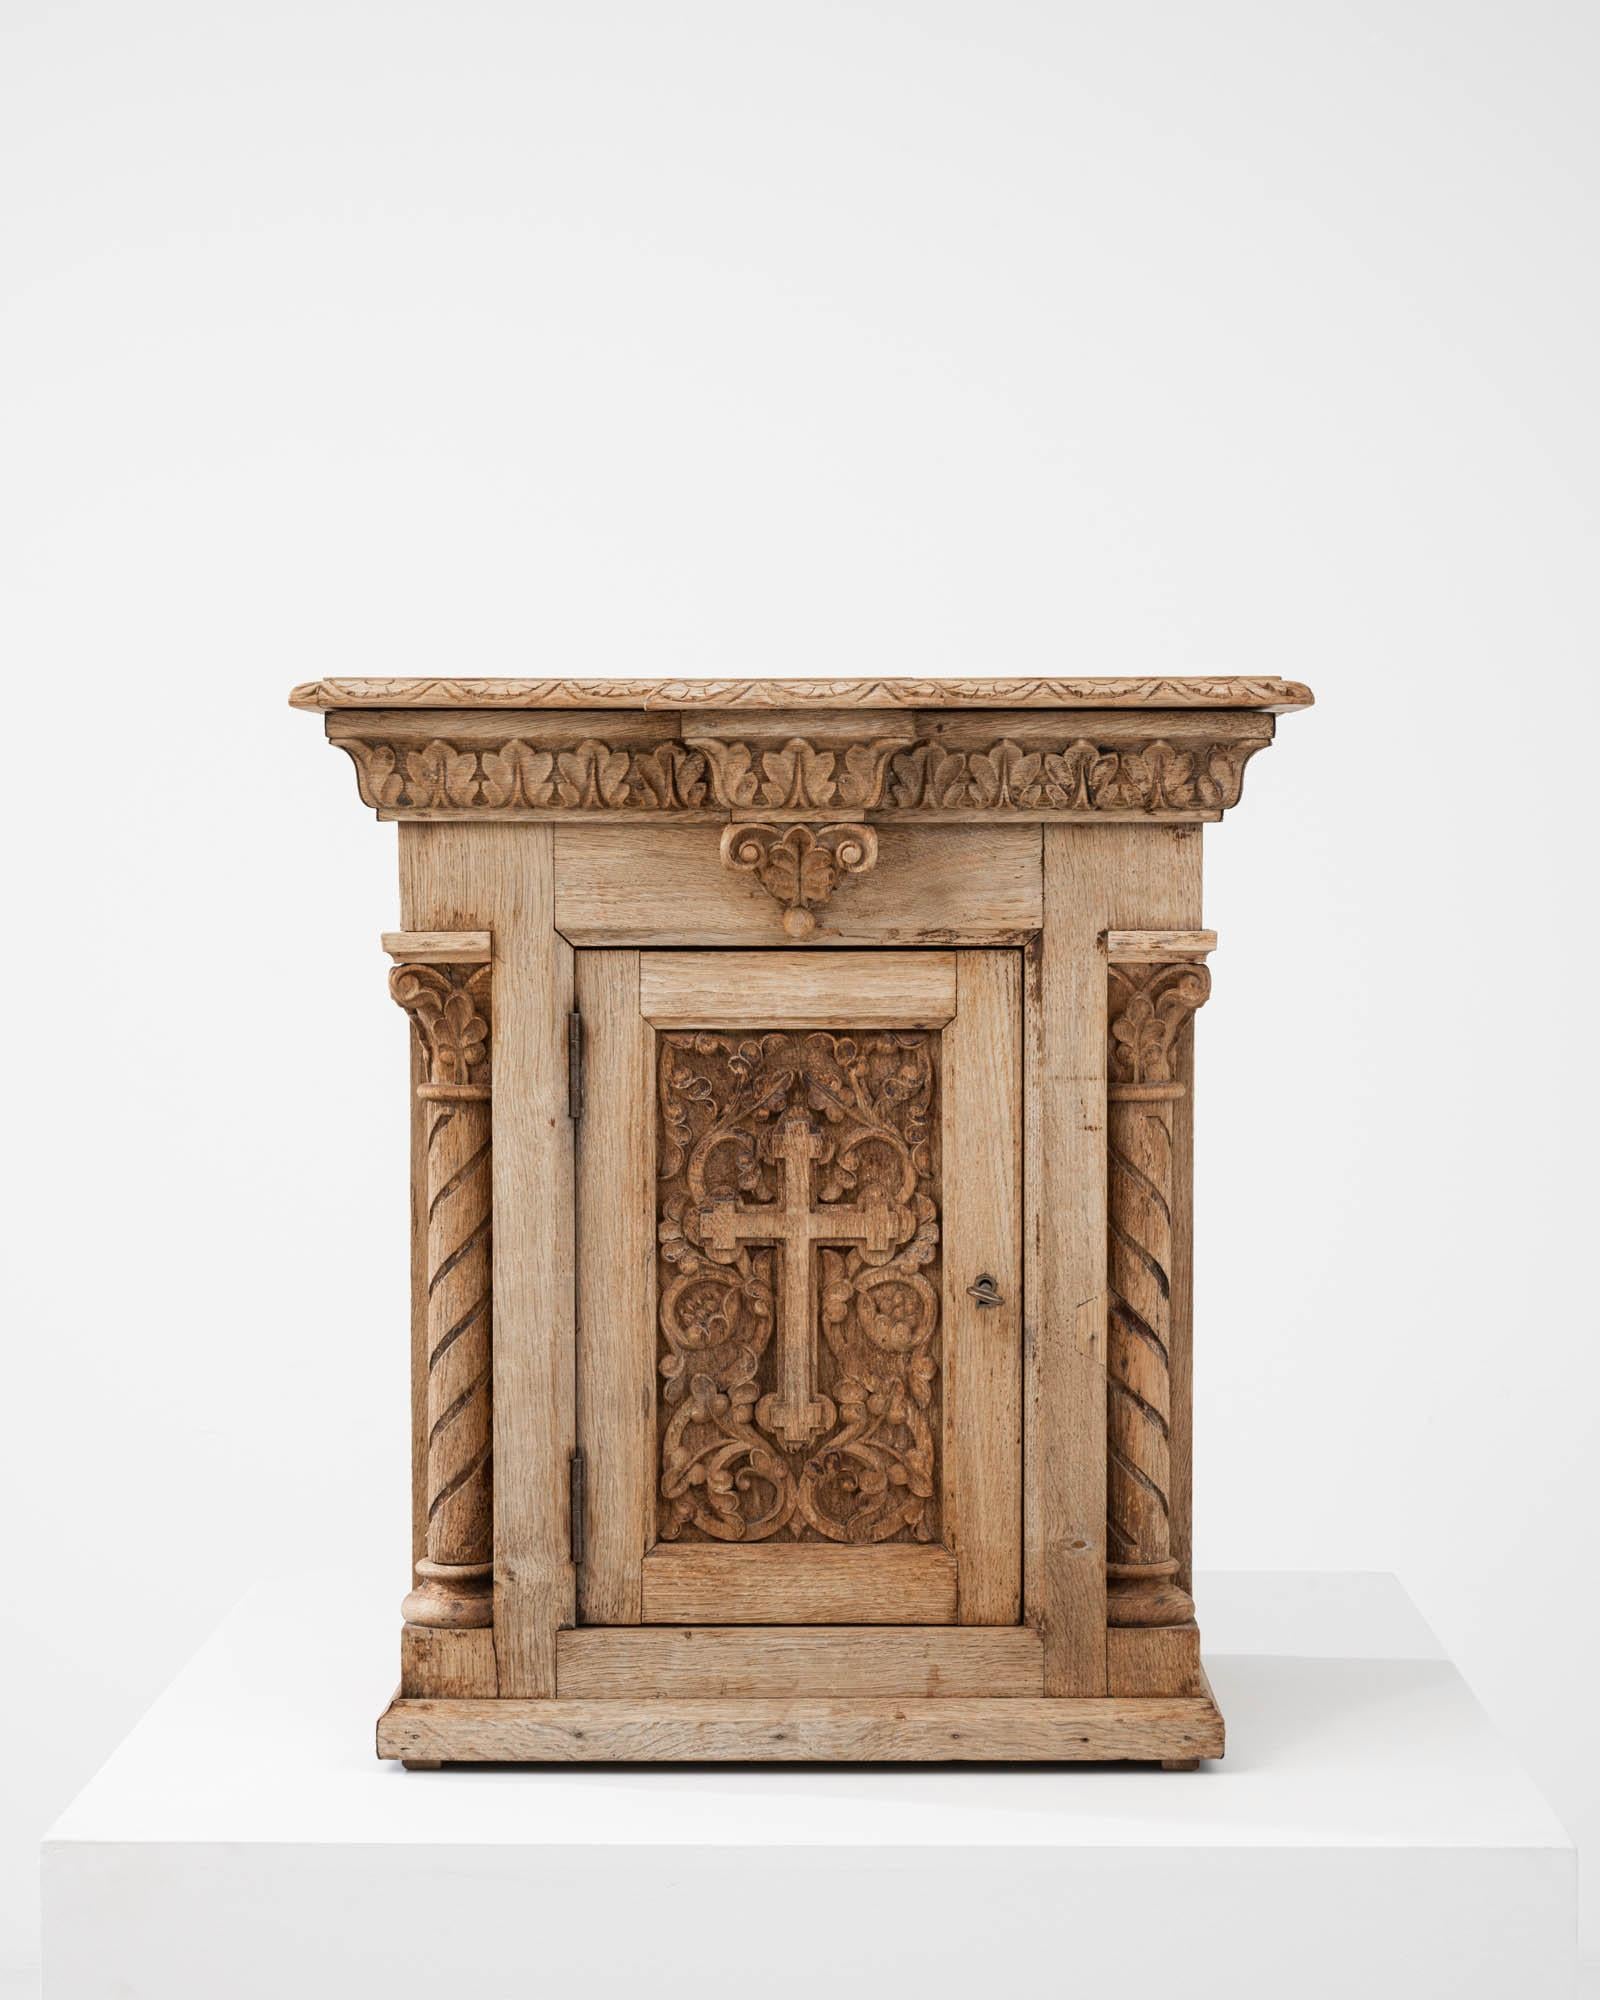 Introducing the 19th Century Belgian Bleached Oak Box, a testament to the enduring beauty of antique craftsmanship. This exquisite piece carries with it the weight of history, with each meticulously carved detail telling a story of bygone eras. The